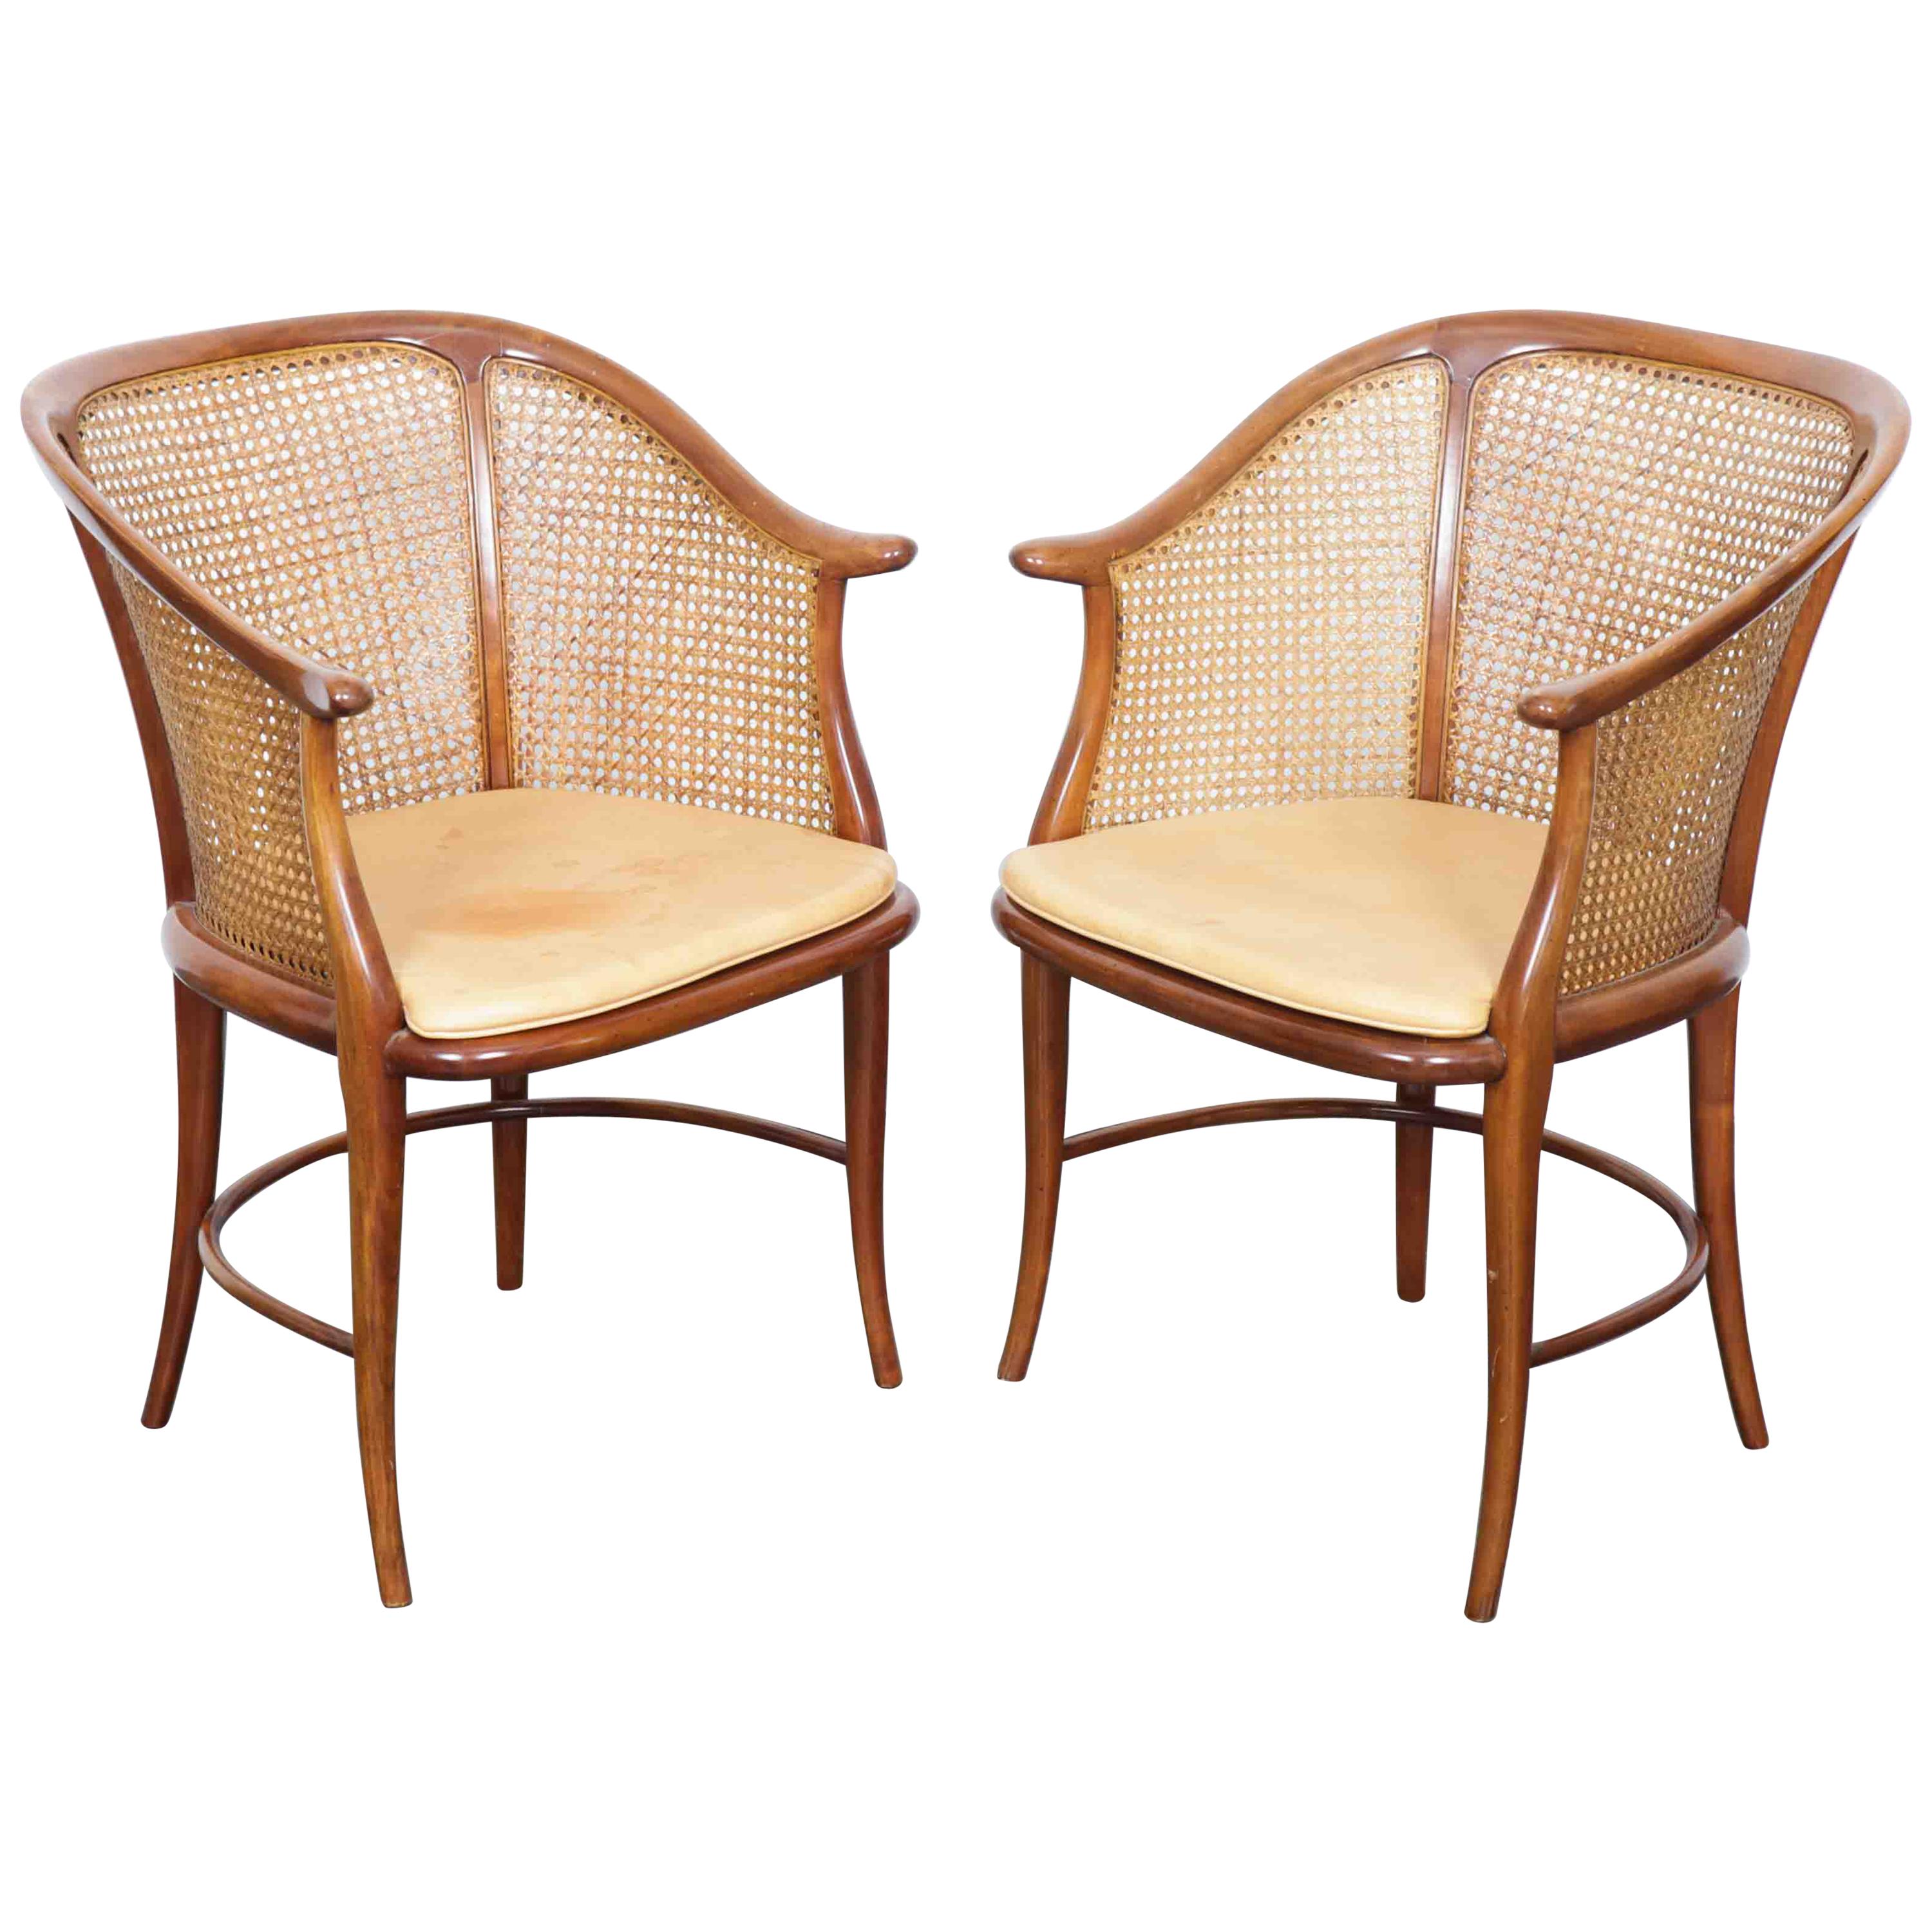 Pair of Cane and Leather Italian Chairs with Cherrywood Frames